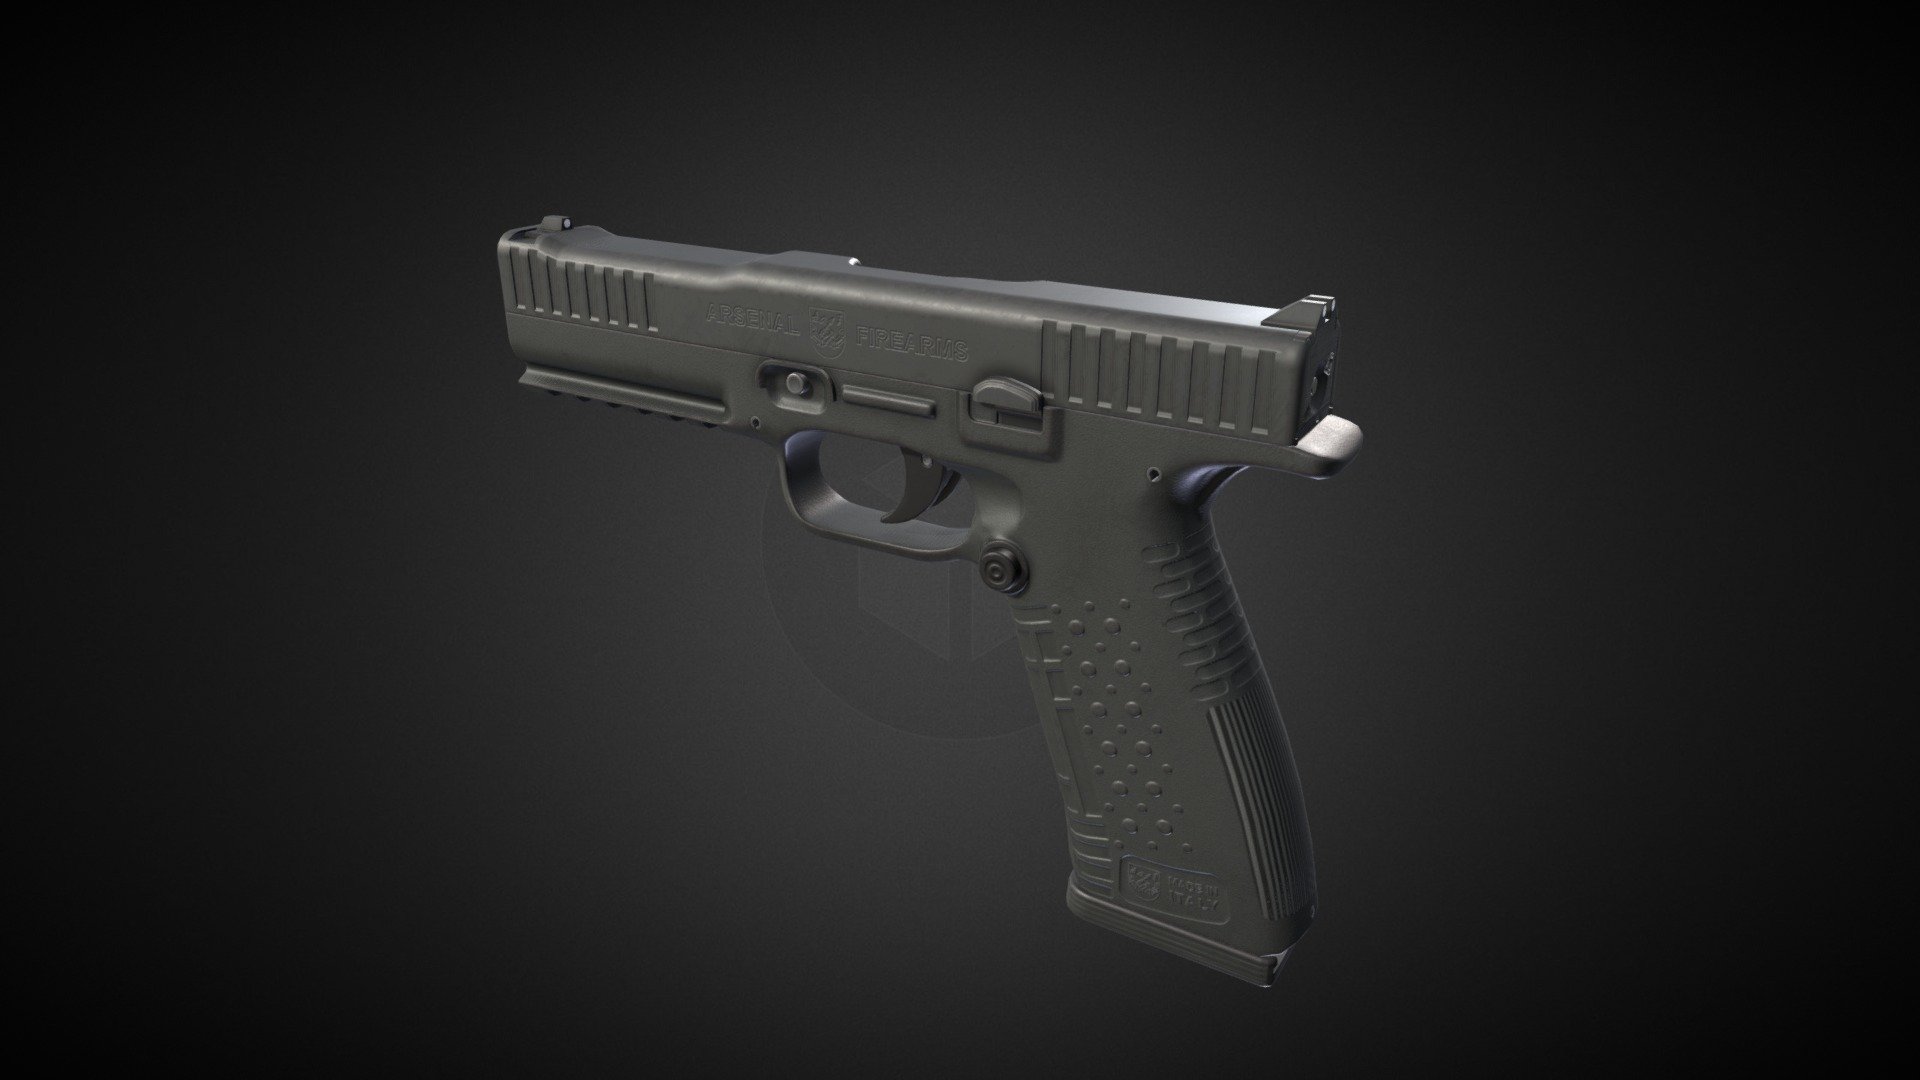 Nice slim semi-automatic pistol also known as Strizh  

Model is rigged, but there is also version with all parts separated.

It have two PBR Materials in 4K. Beside black I also added those fancy orange and blue colors made for Ergal model.

Verts:  8K

Tris:  15K  

Made in Blender 3d model